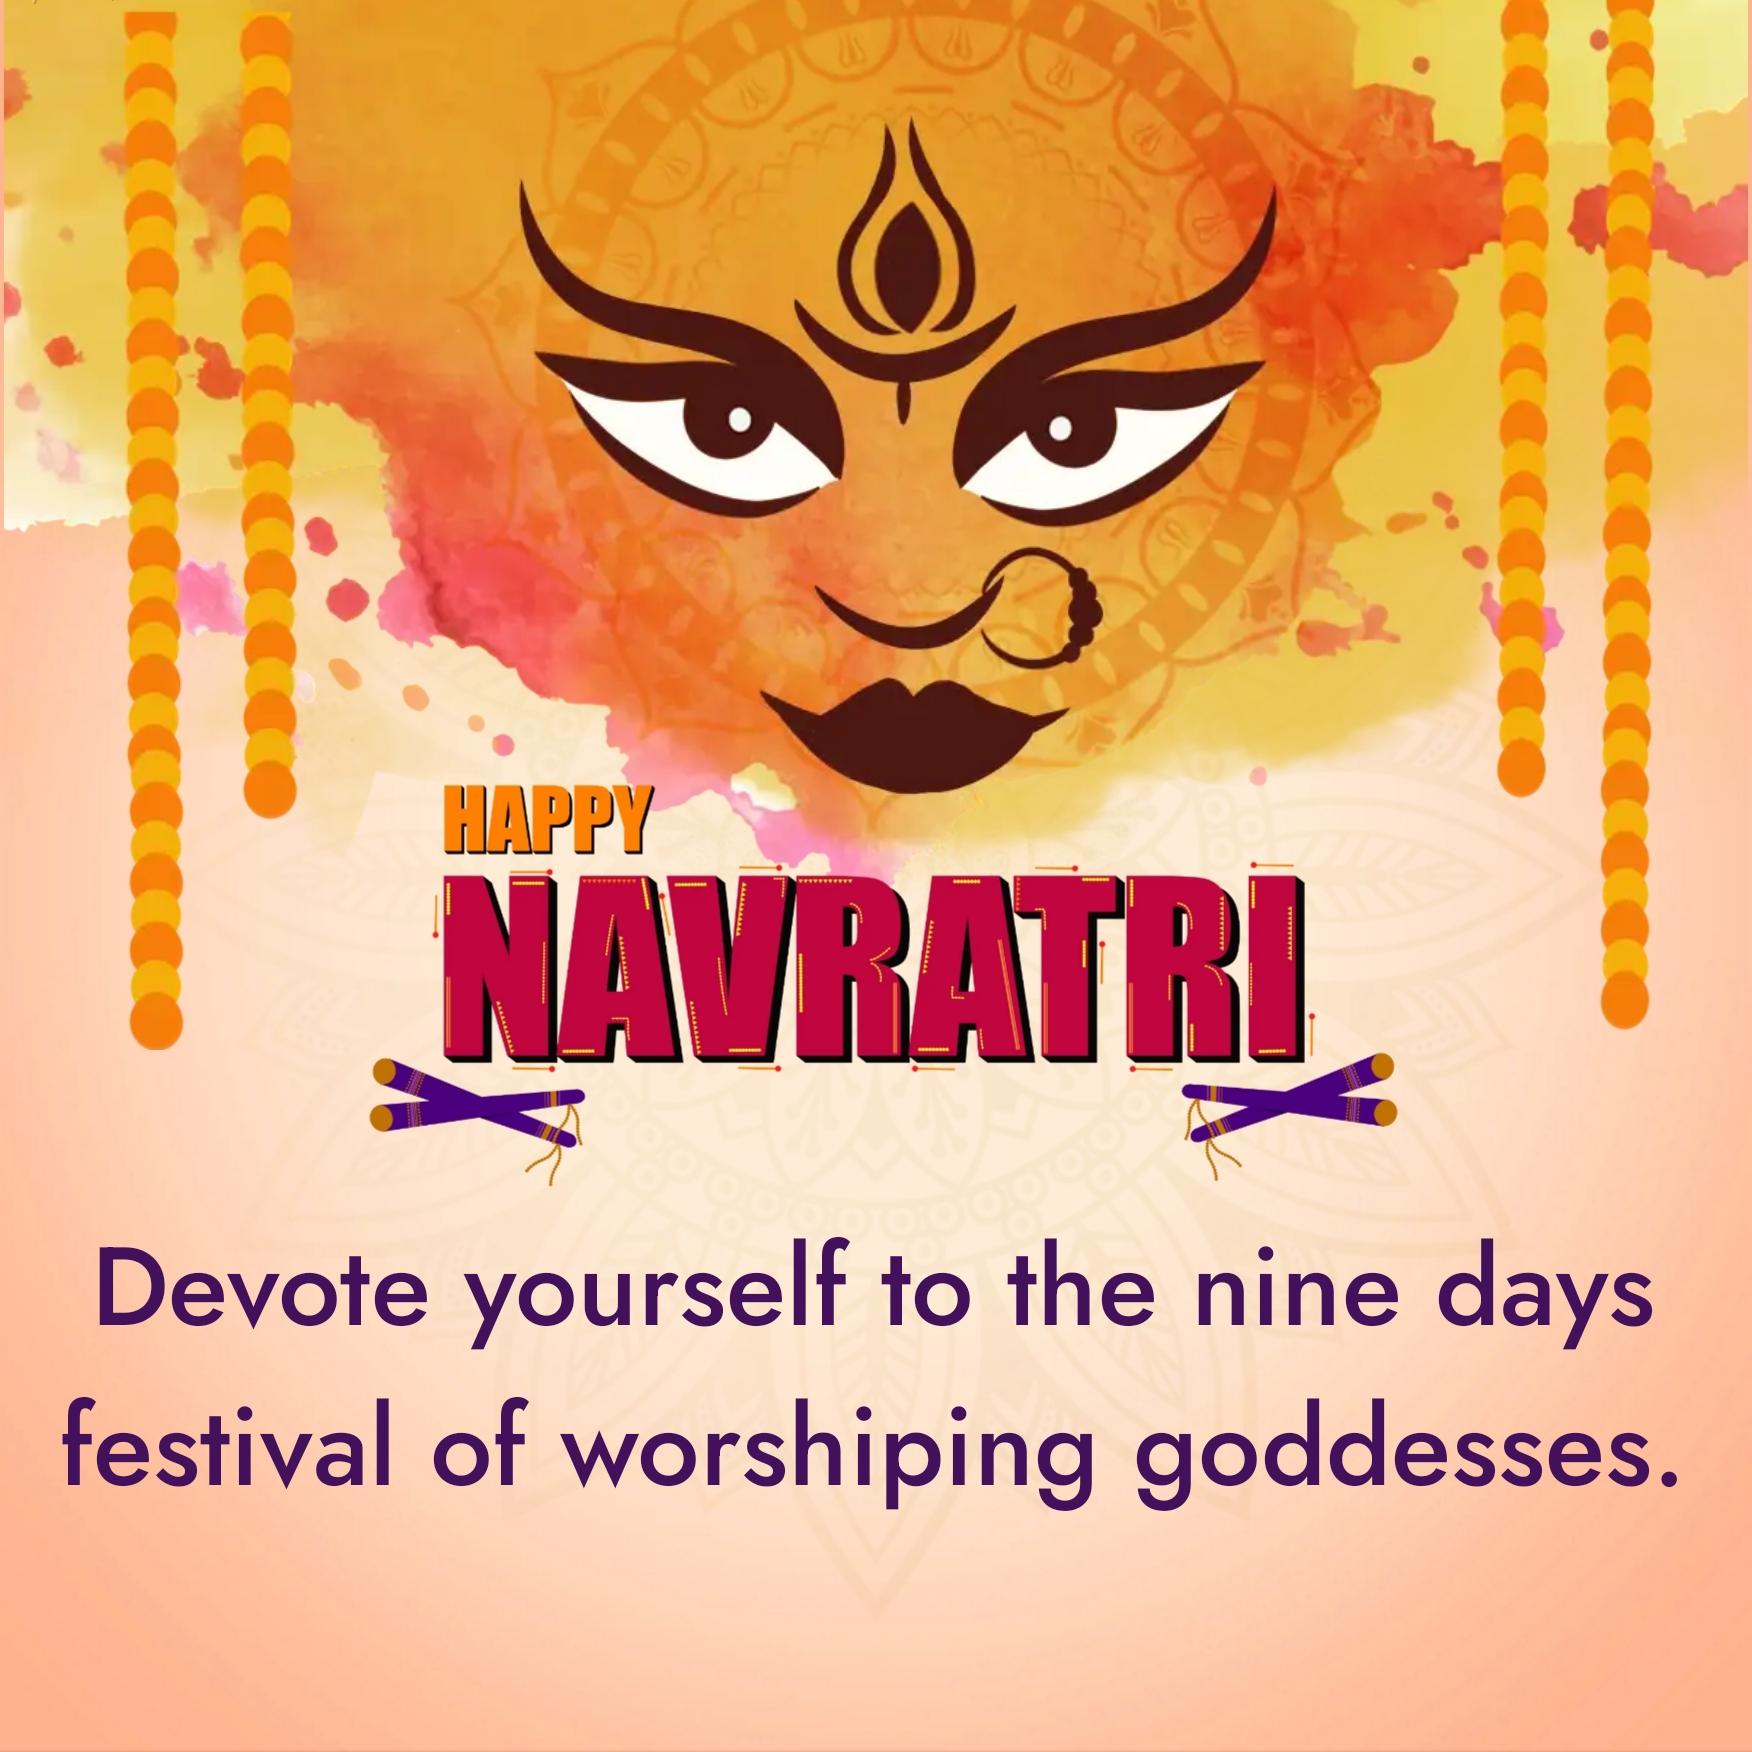 Devote yourself to the nine days festival of worshiping